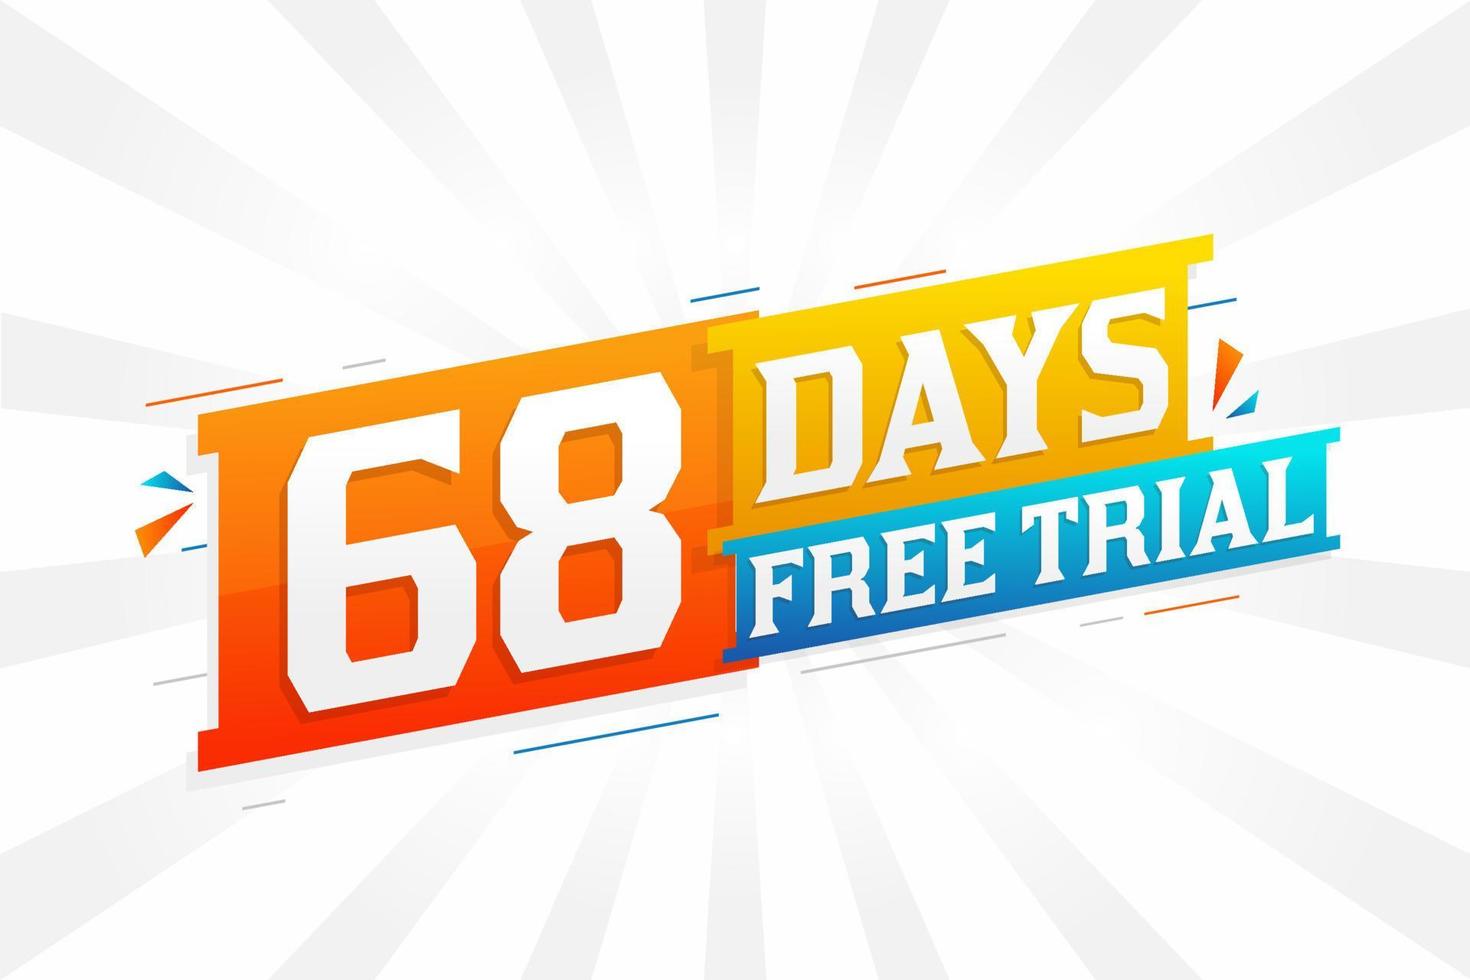 68 Days free Trial promotional bold text stock vector